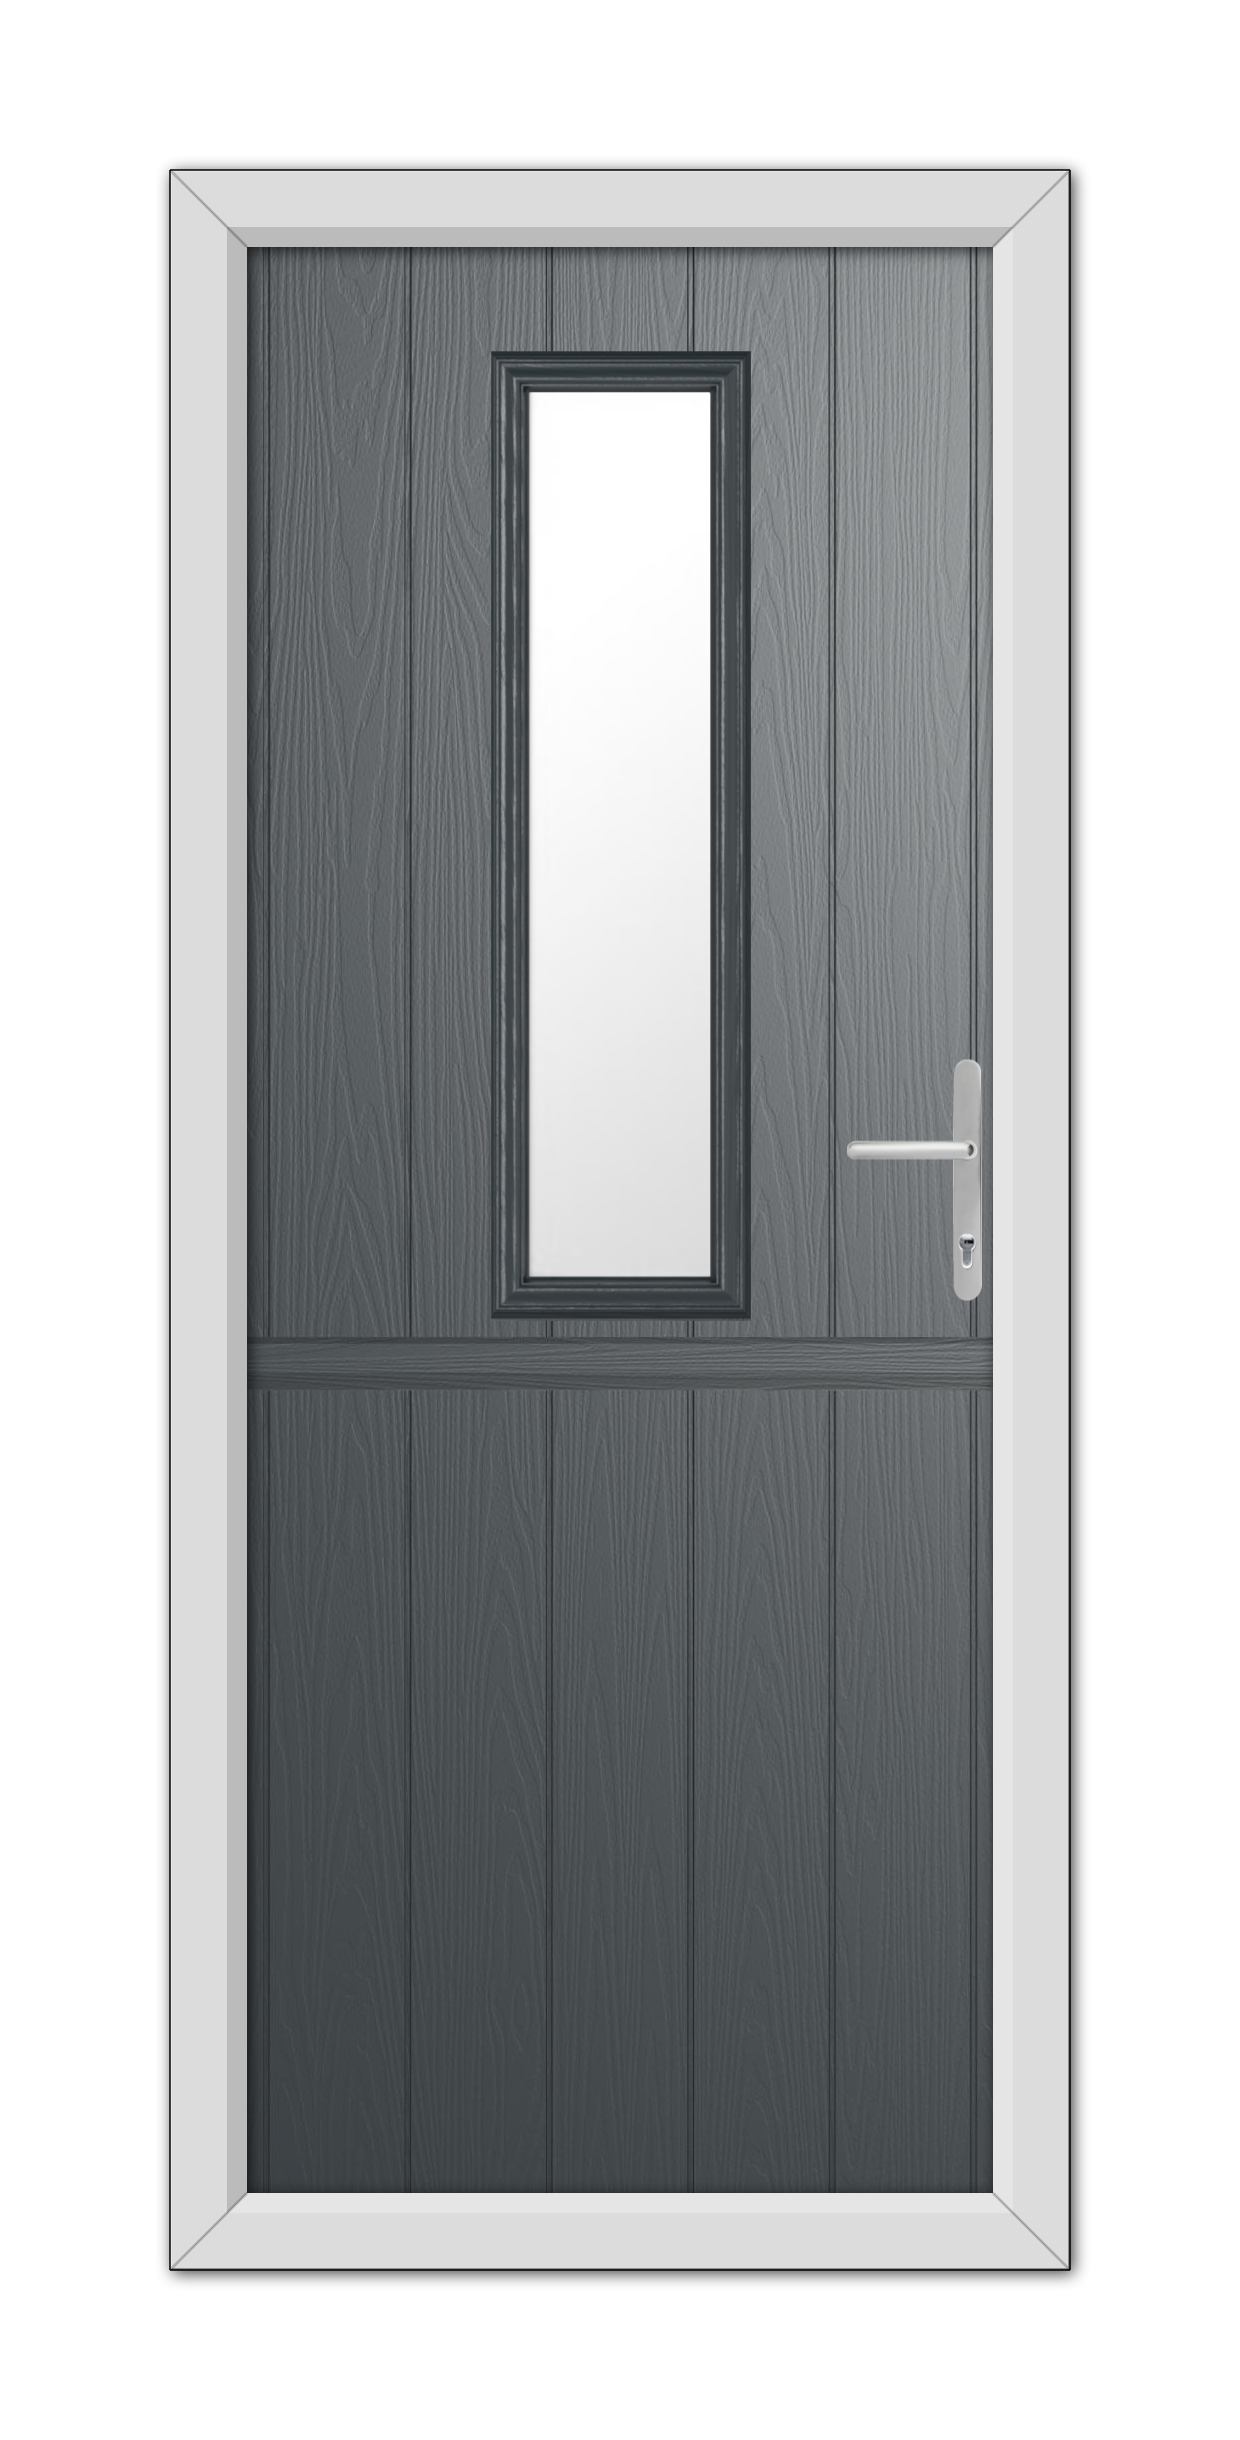 A modern Anthracite Grey Mowbray Stable Composite Door 48mm Timber Core with a central vertical window and a metallic handle, set within a white frame.